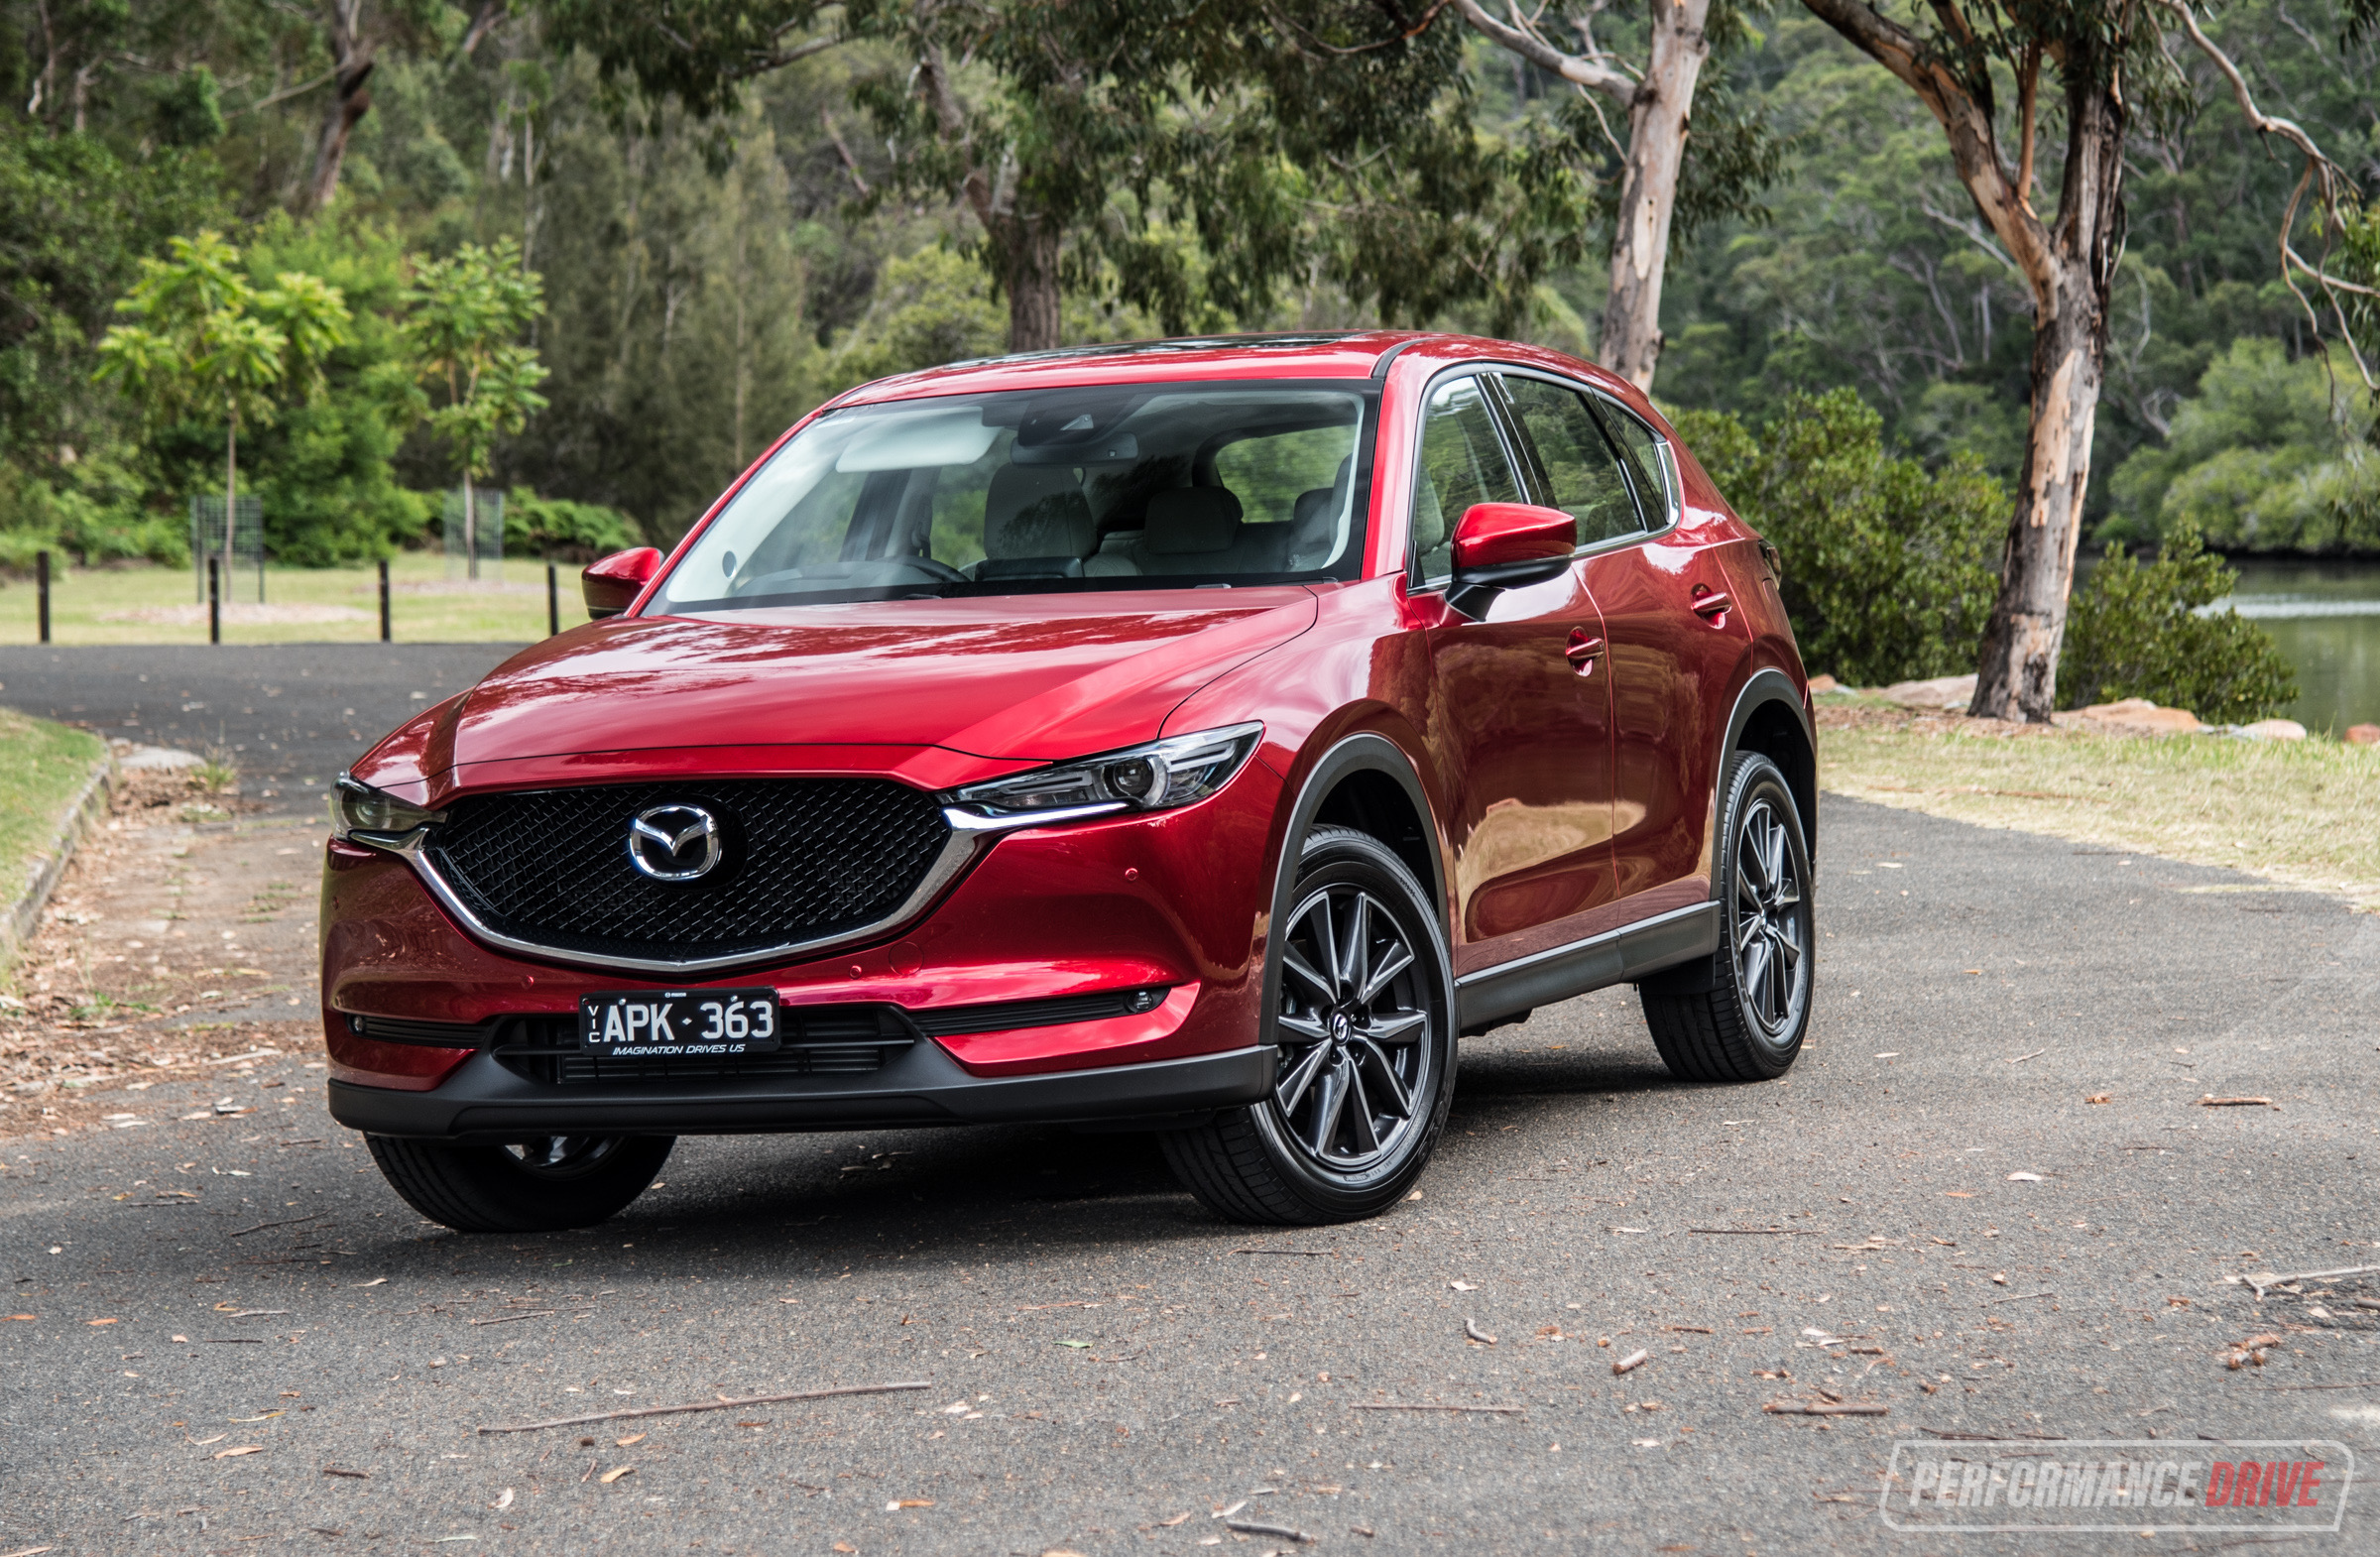 2018 Mazda CX-5 diesel: Everything you need to know (POV review)